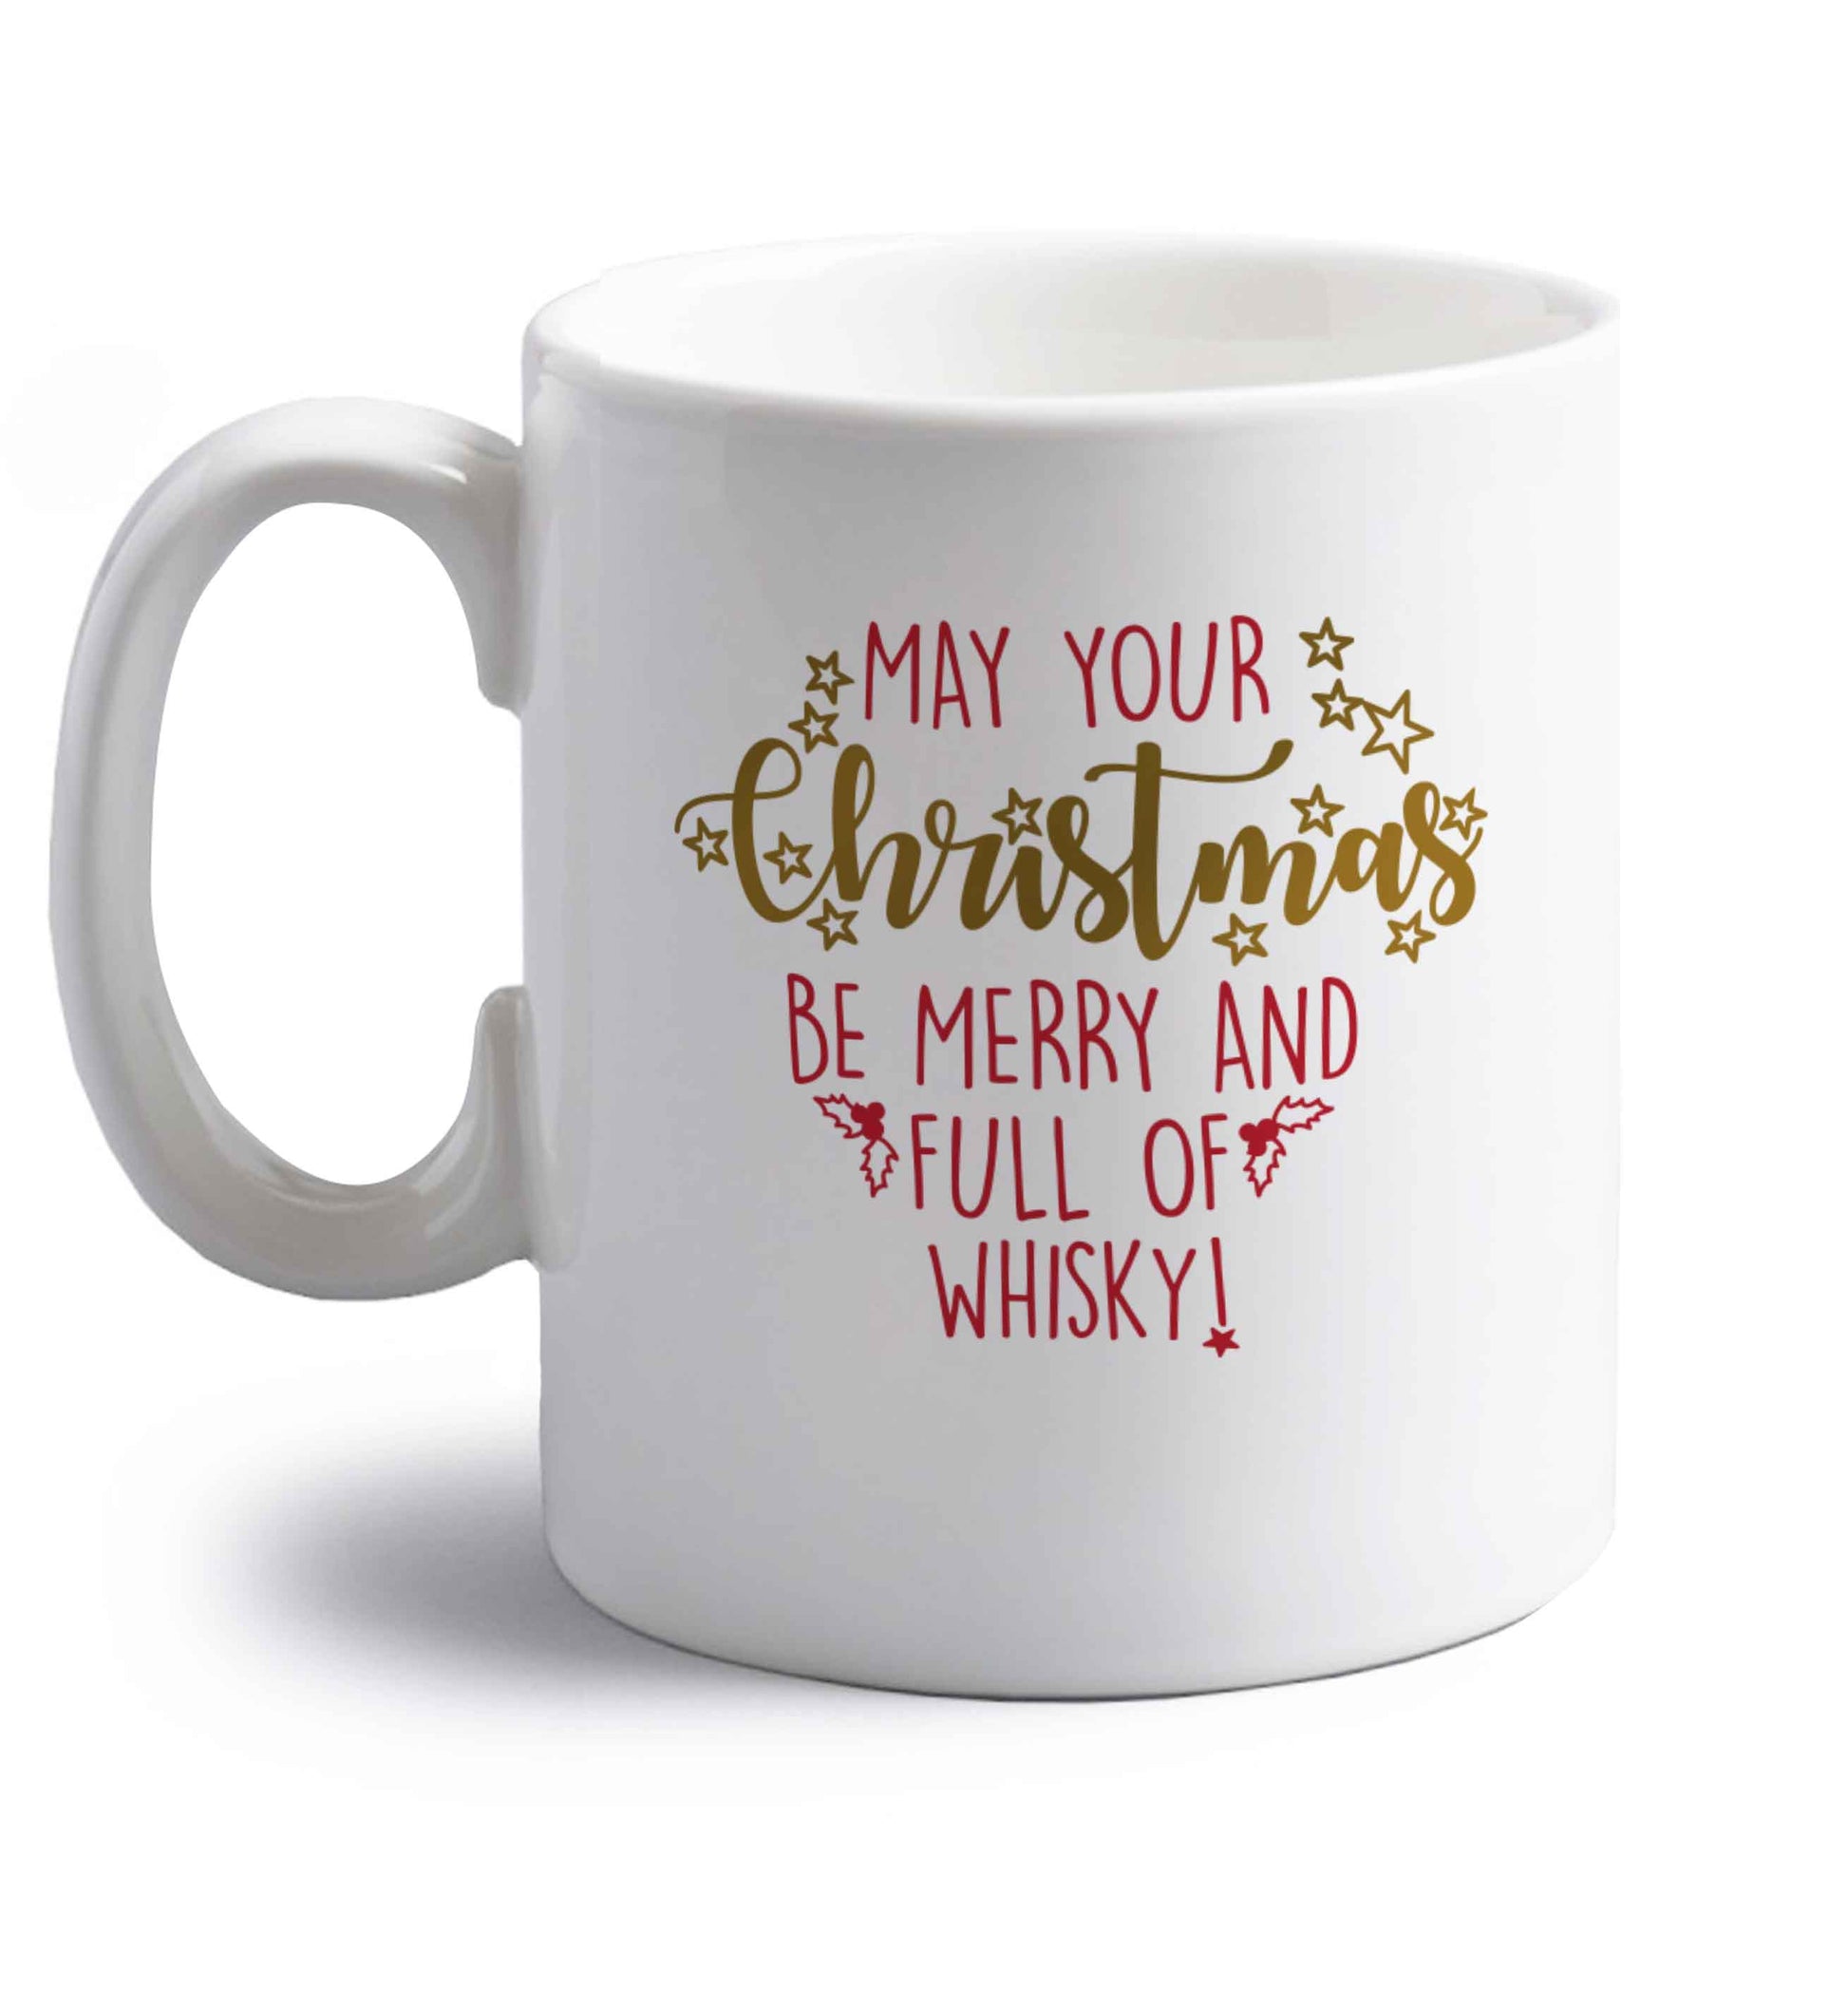 May your Christmas be merry and full of whisky right handed white ceramic mug 